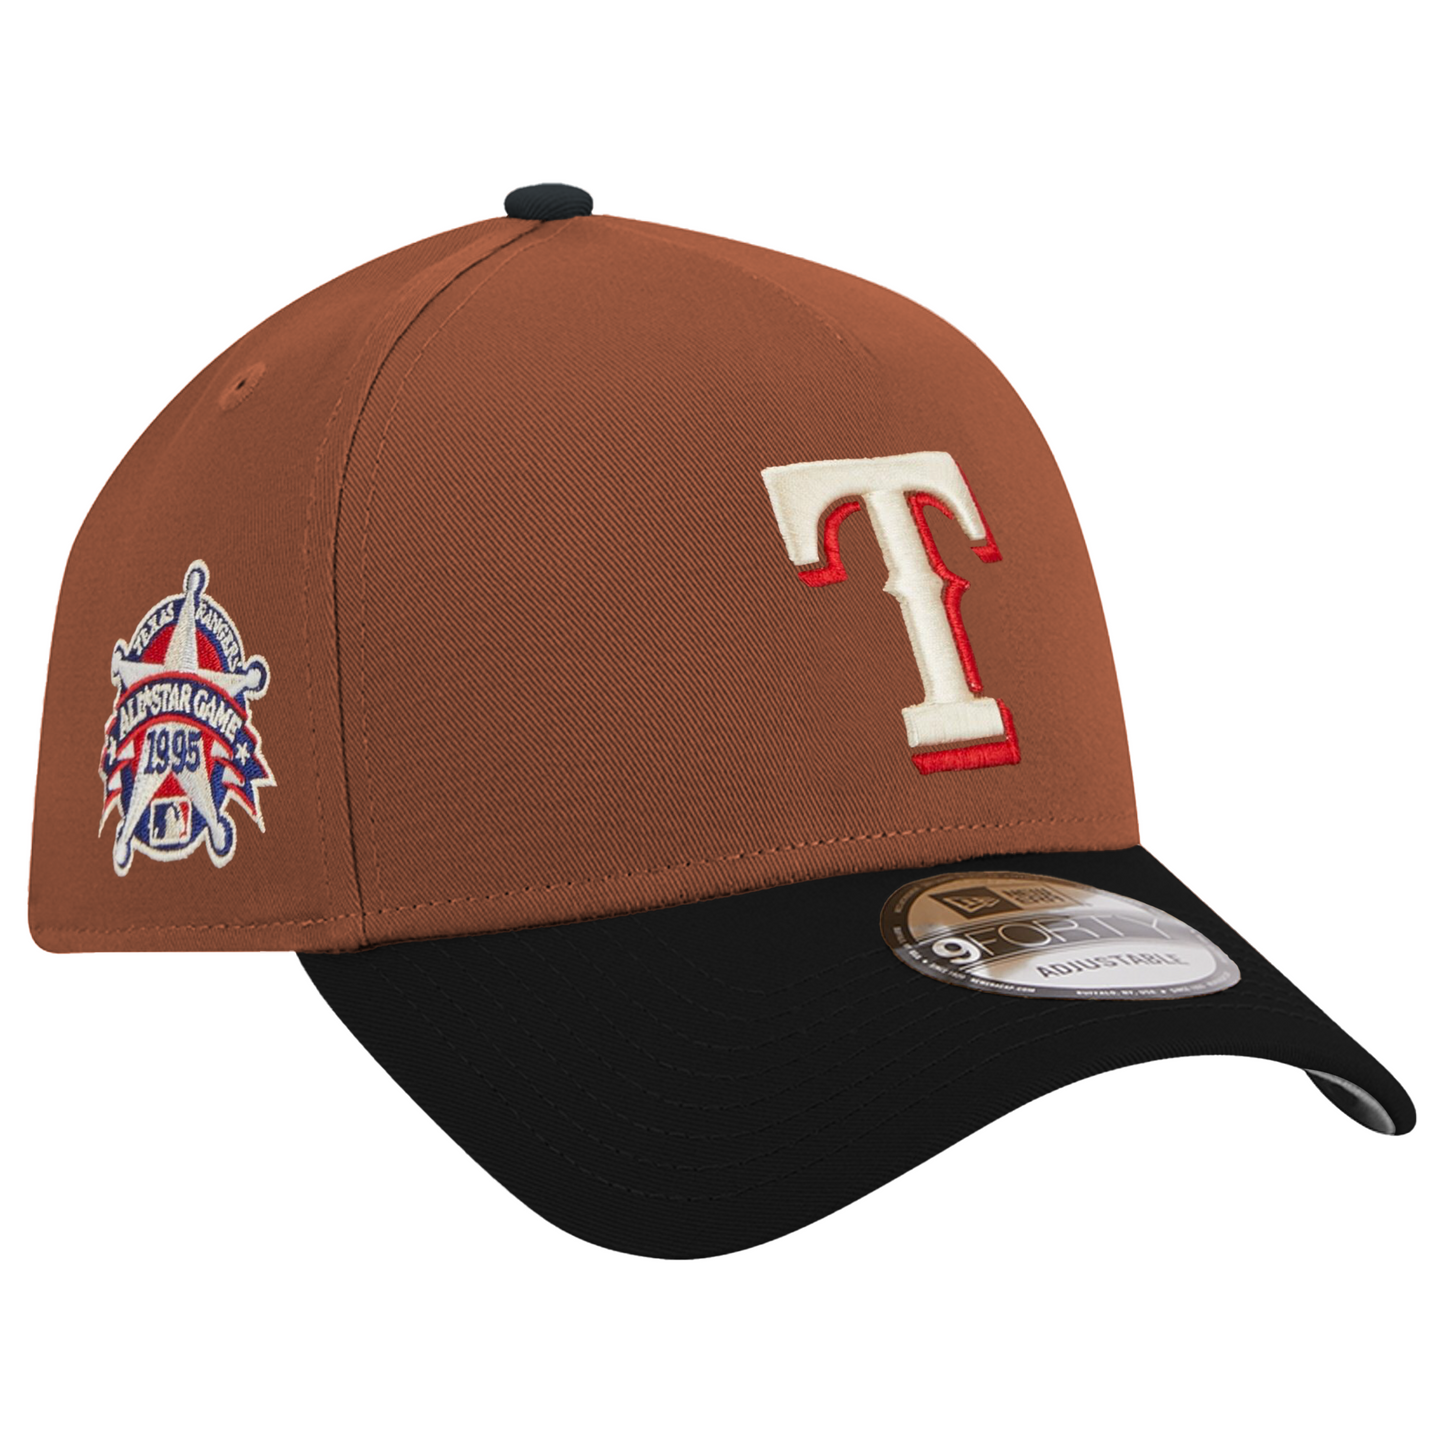 New Era 9FORTY Texas Rangers Sidepatch Snapback